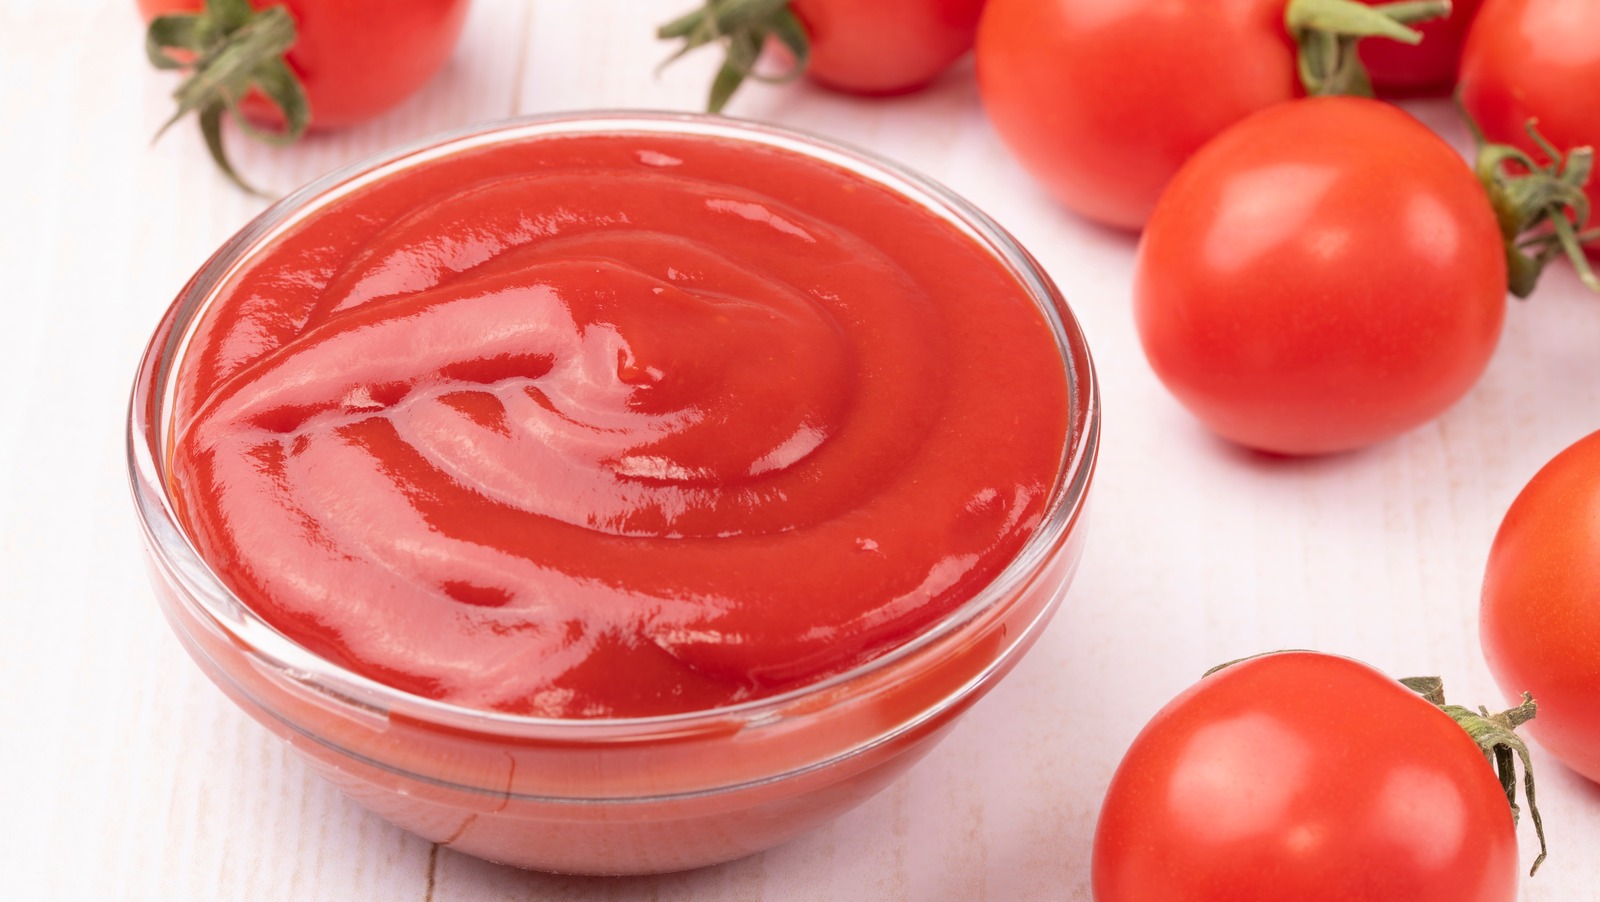 A bowl of ketchup and some tomatoes